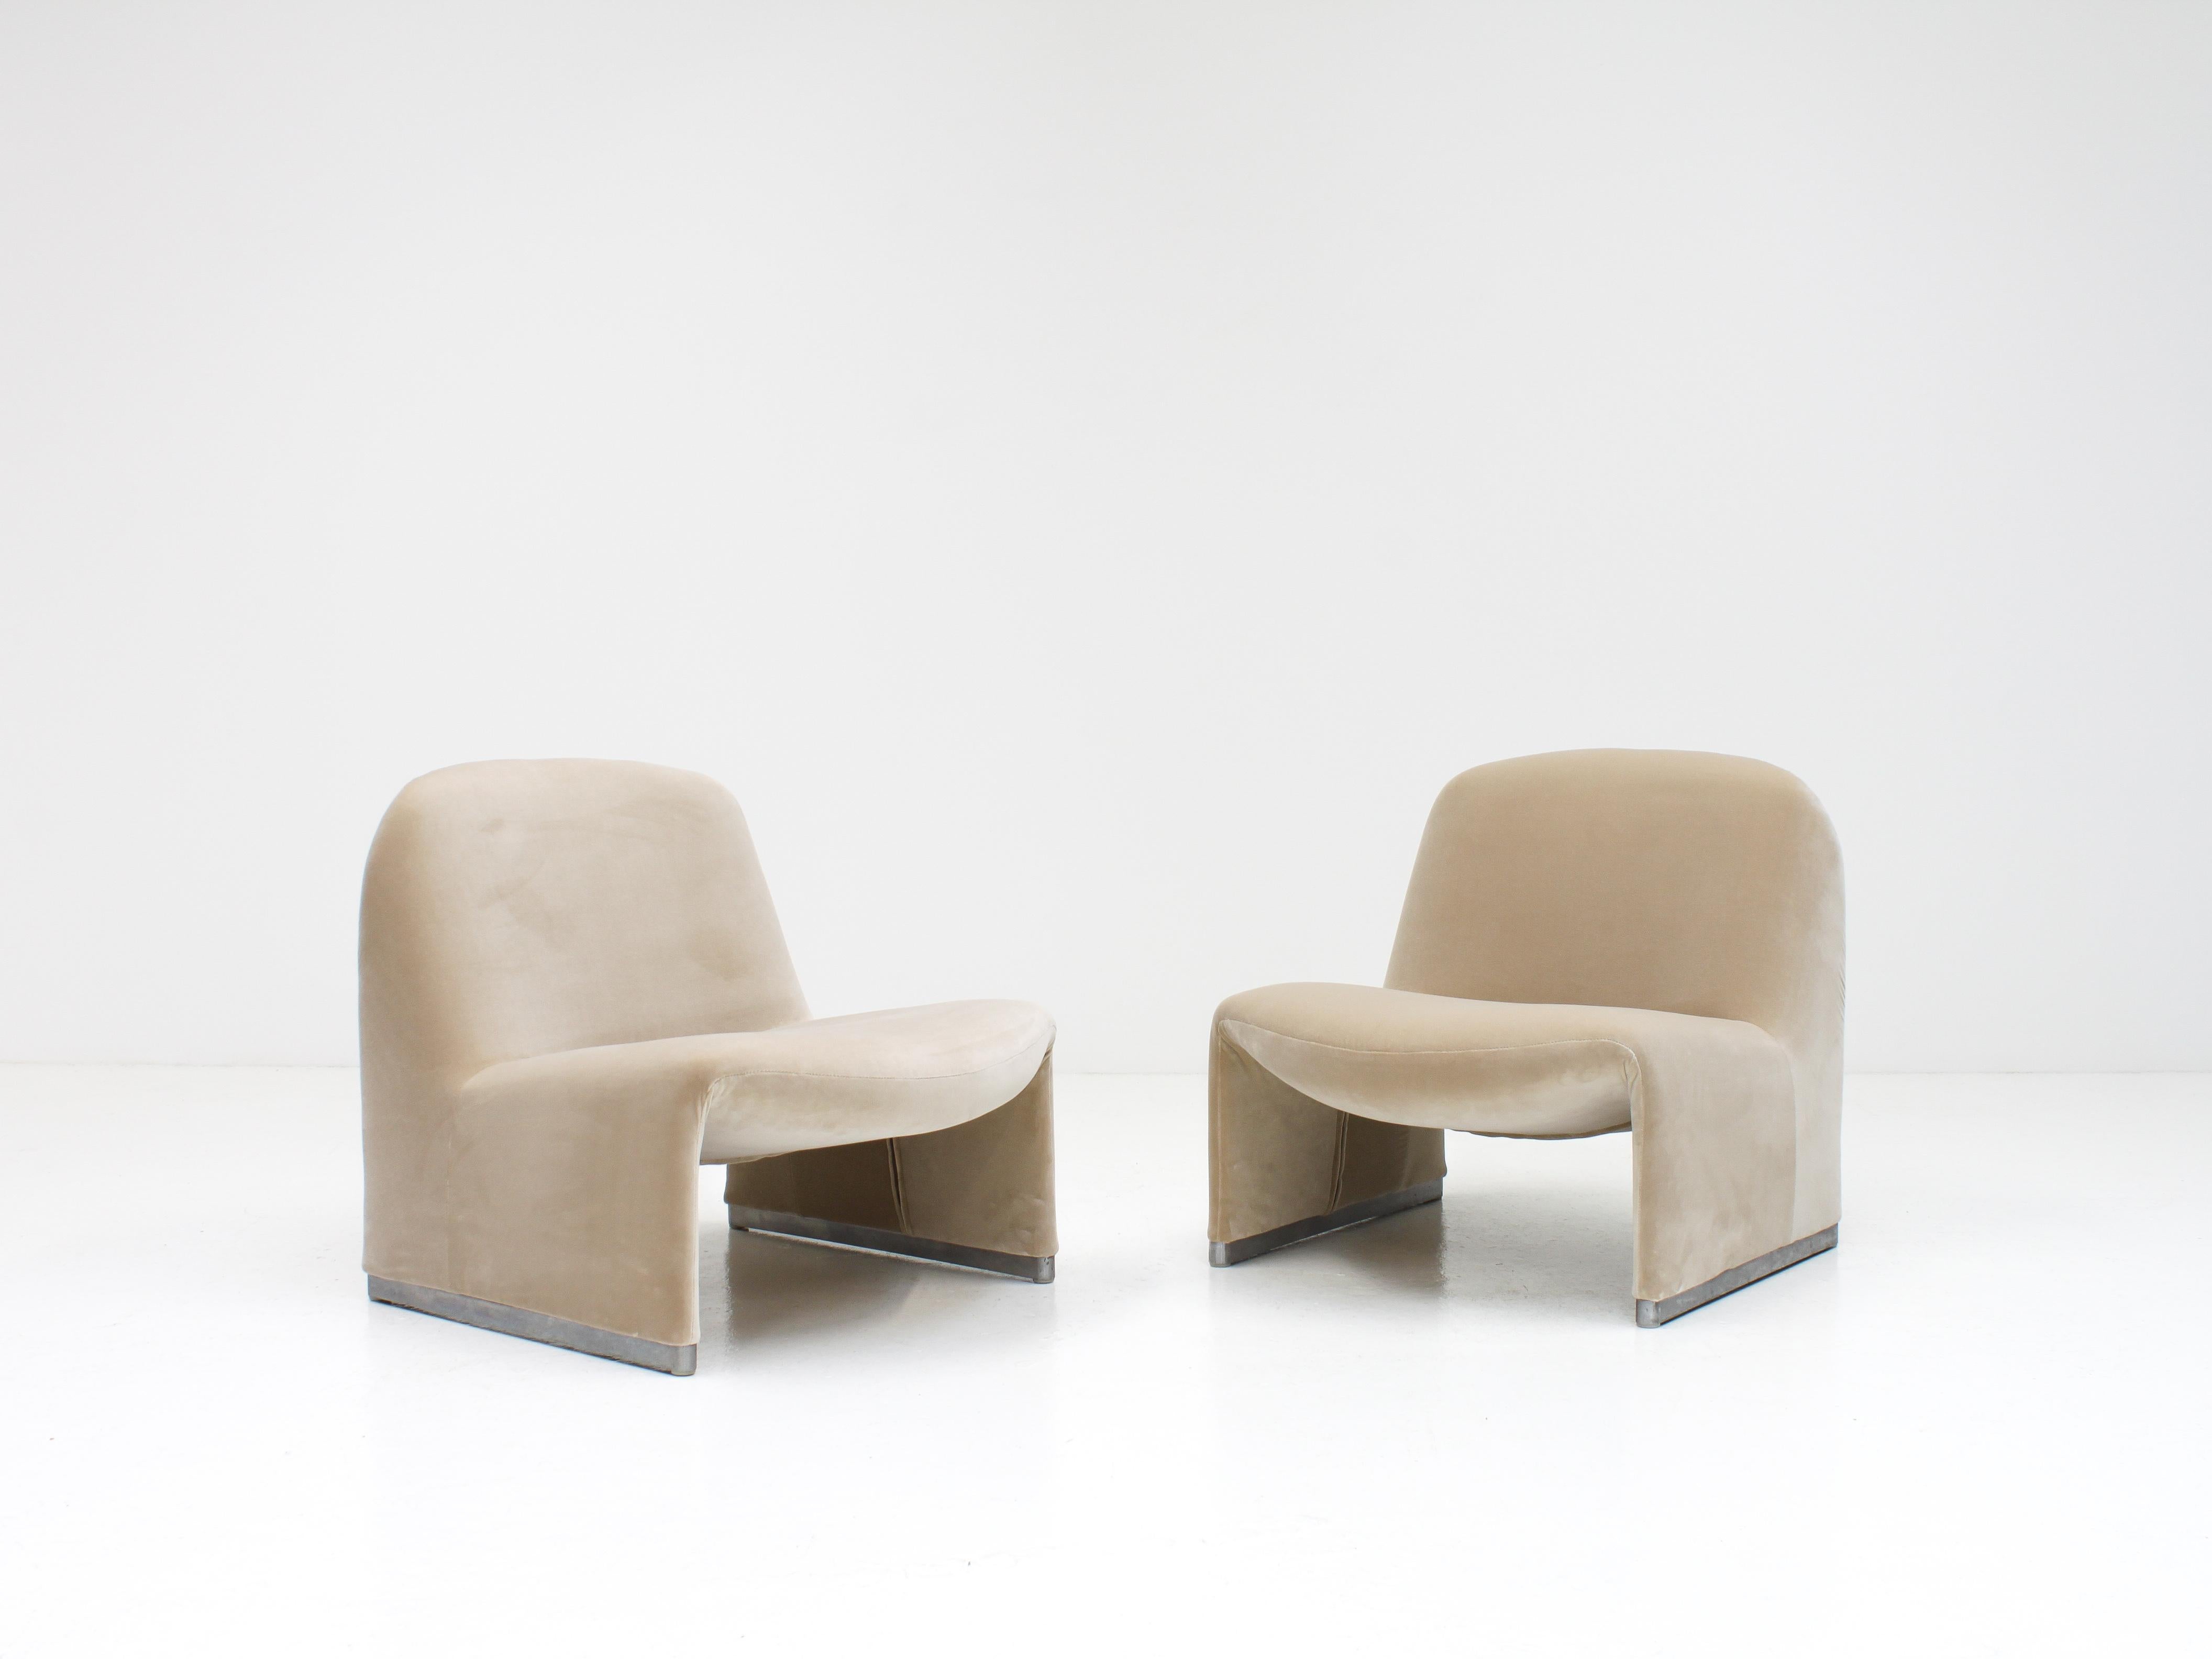 A pair of Giancarlo Piretti “Alky” chairs newly upholstered in Designers Guild linen-colored cotton velvet & potentially customizable in over 100 colors.

*Lead time for despatch of Alky chairs in the 'Linen' colored velvet shown is currently 4